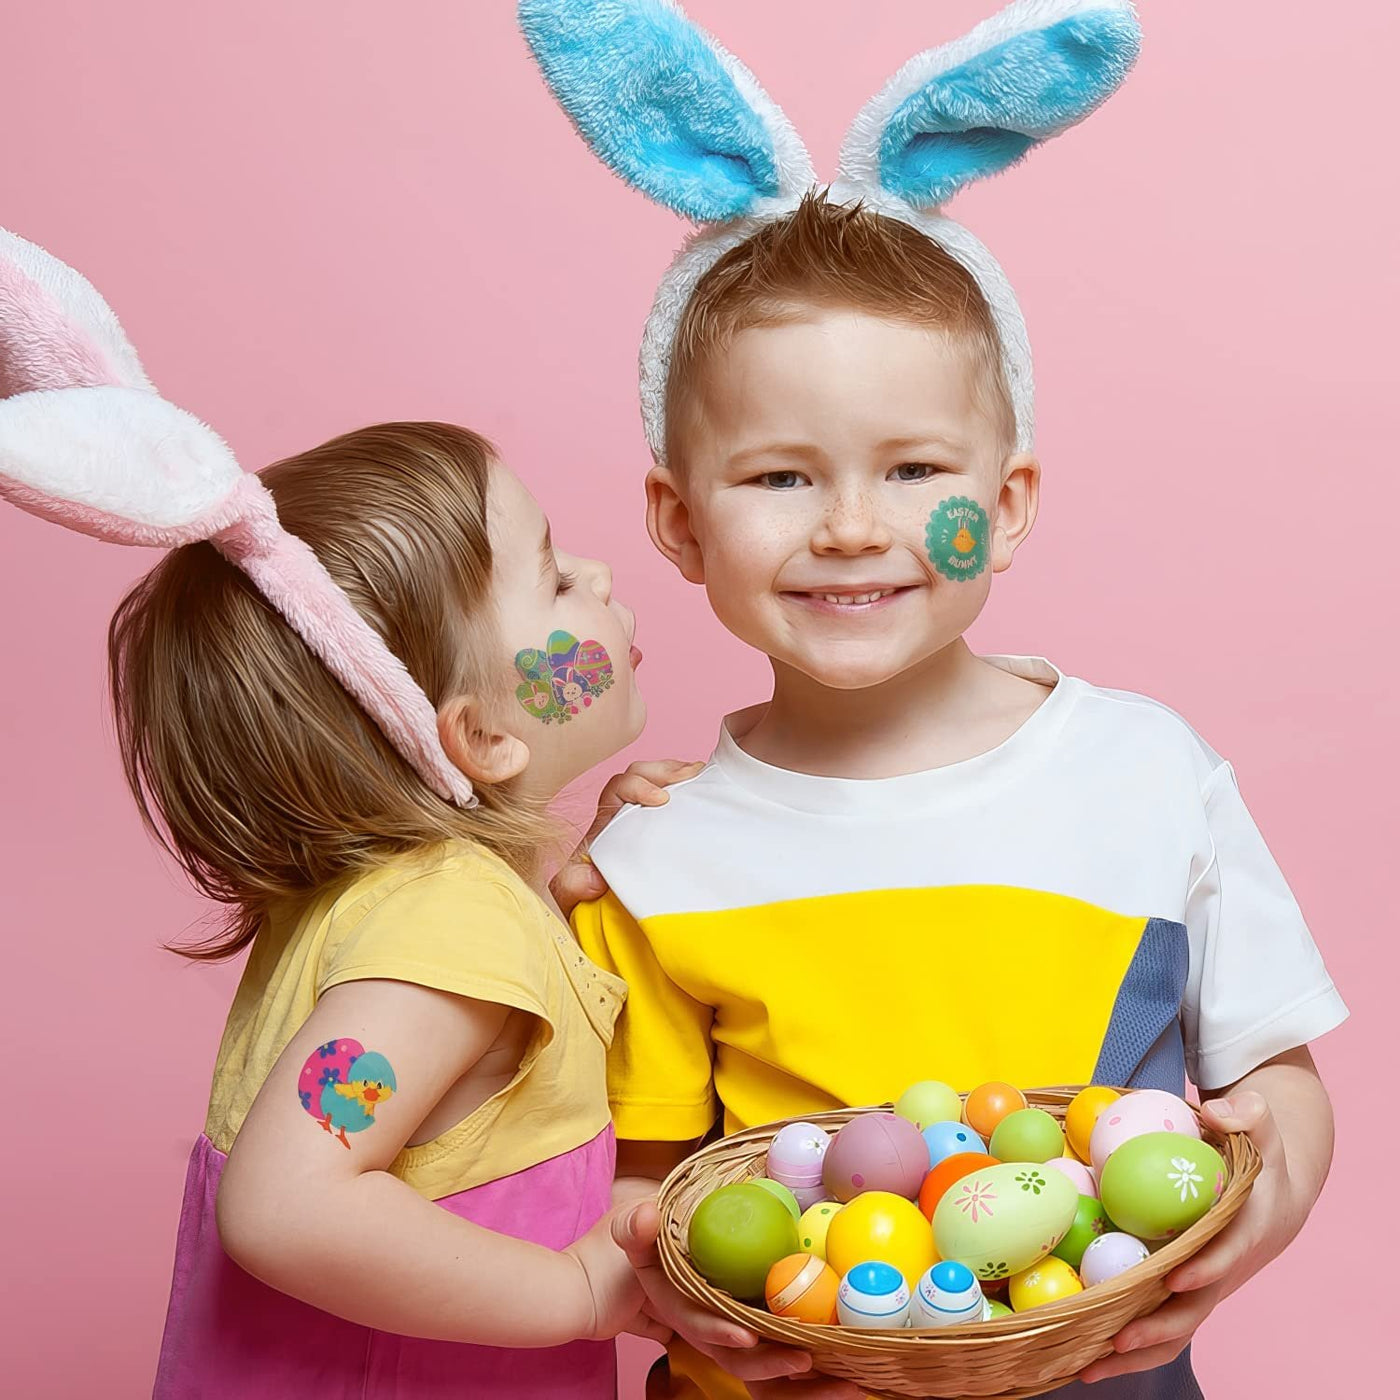 Temporary Easter Tattoos for Kids, Bulk Pack of 144, 2" Non-Toxic Tats Stickers for Boys and Girls, Fun Easter Basket Stuffers, Cute Surprise Egg Toys, Treats, Goodie Bag Fillers